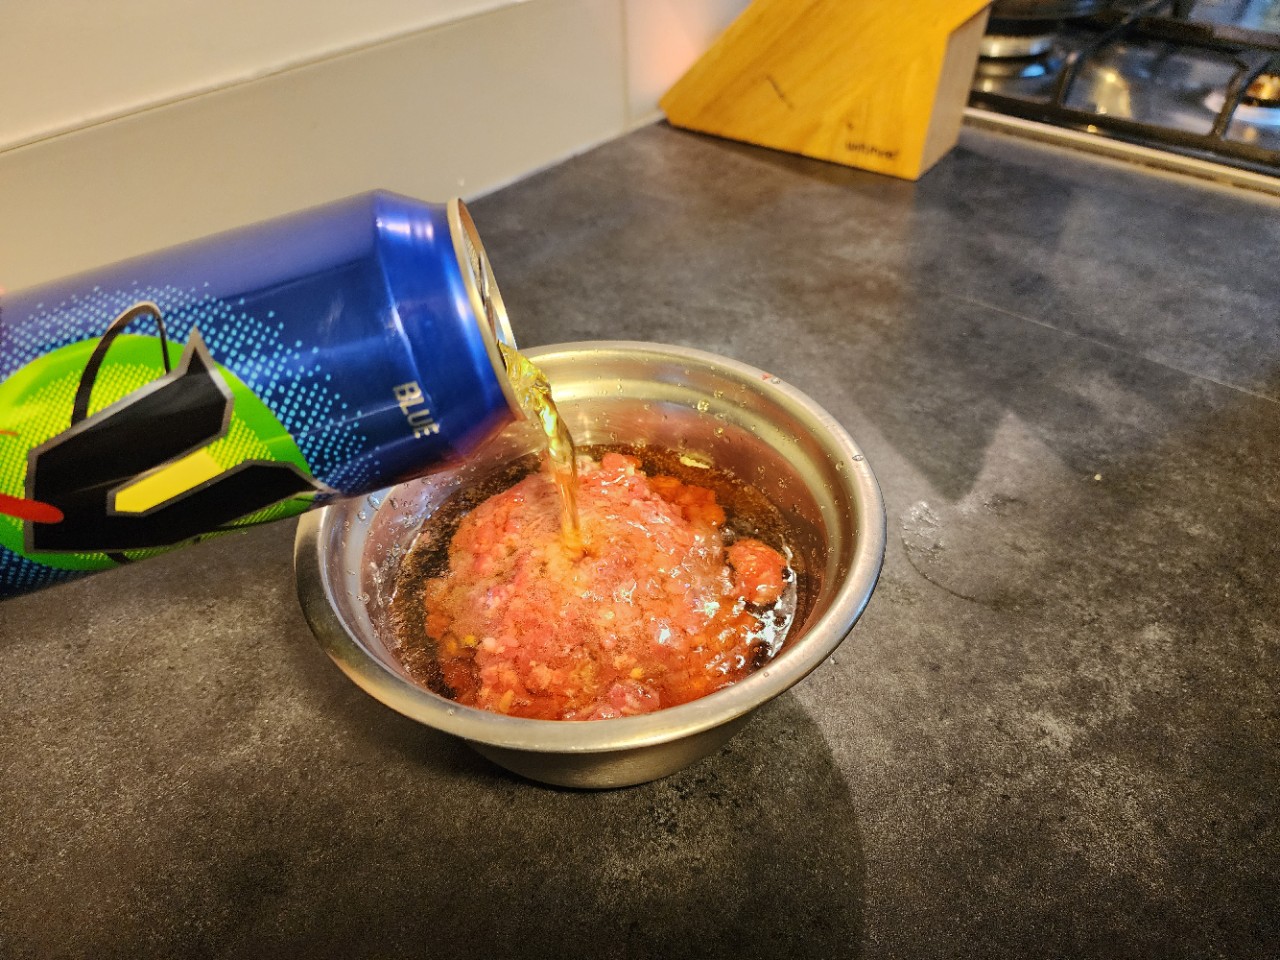 Kiwi lad makes Blue V-infused mince and cheese pie 'abomination' for the tradies